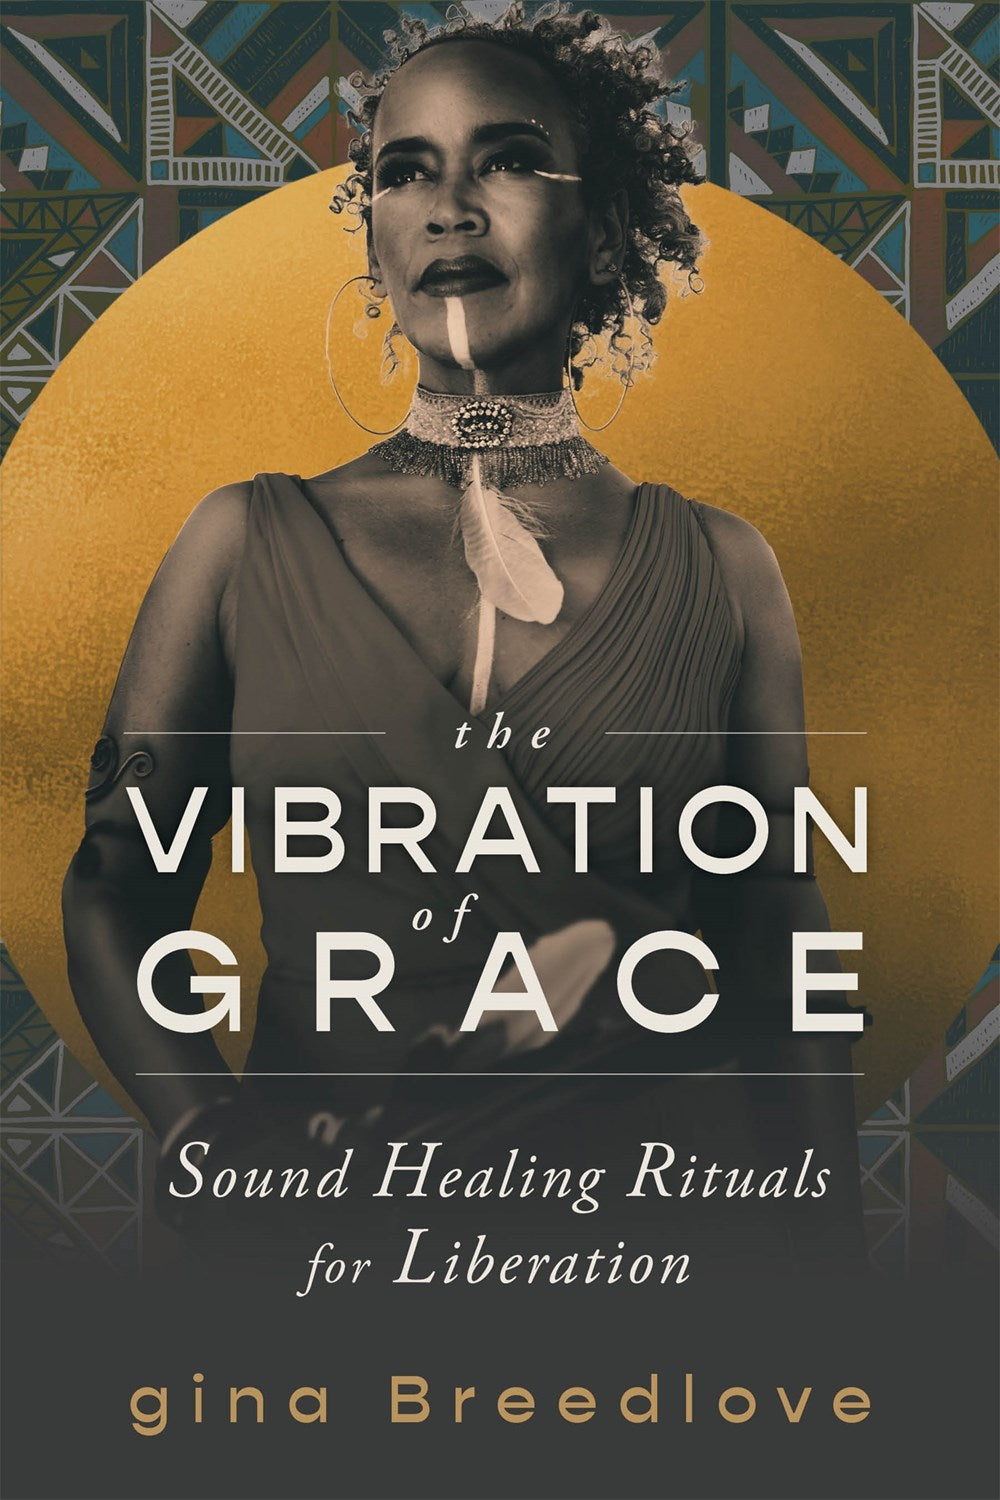 PRE-ORDER: The Vibration of Grace: Sound Healing Rituals for Liberation